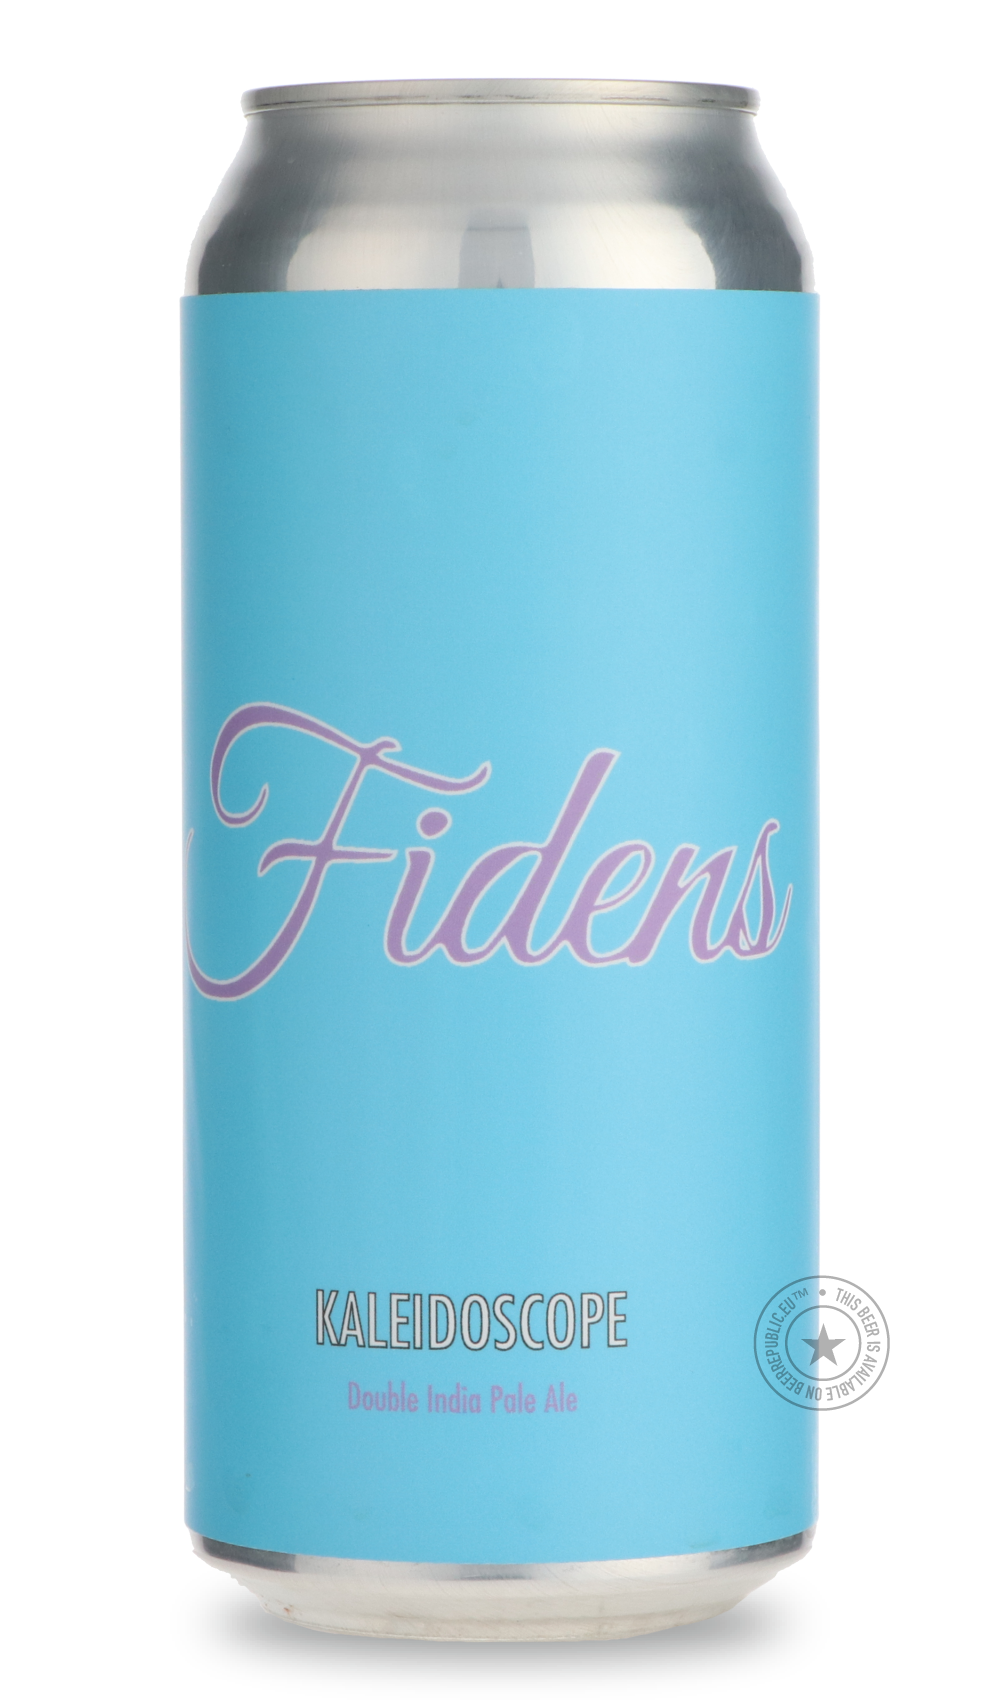 -Fidens- Kaleidoscope-IPA- Only @ Beer Republic - The best online beer store for American & Canadian craft beer - Buy beer online from the USA and Canada - Bier online kopen - Amerikaans bier kopen - Craft beer store - Craft beer kopen - Amerikanisch bier kaufen - Bier online kaufen - Acheter biere online - IPA - Stout - Porter - New England IPA - Hazy IPA - Imperial Stout - Barrel Aged - Barrel Aged Imperial Stout - Brown - Dark beer - Blond - Blonde - Pilsner - Lager - Wheat - Weizen - Amber - Barley Wine